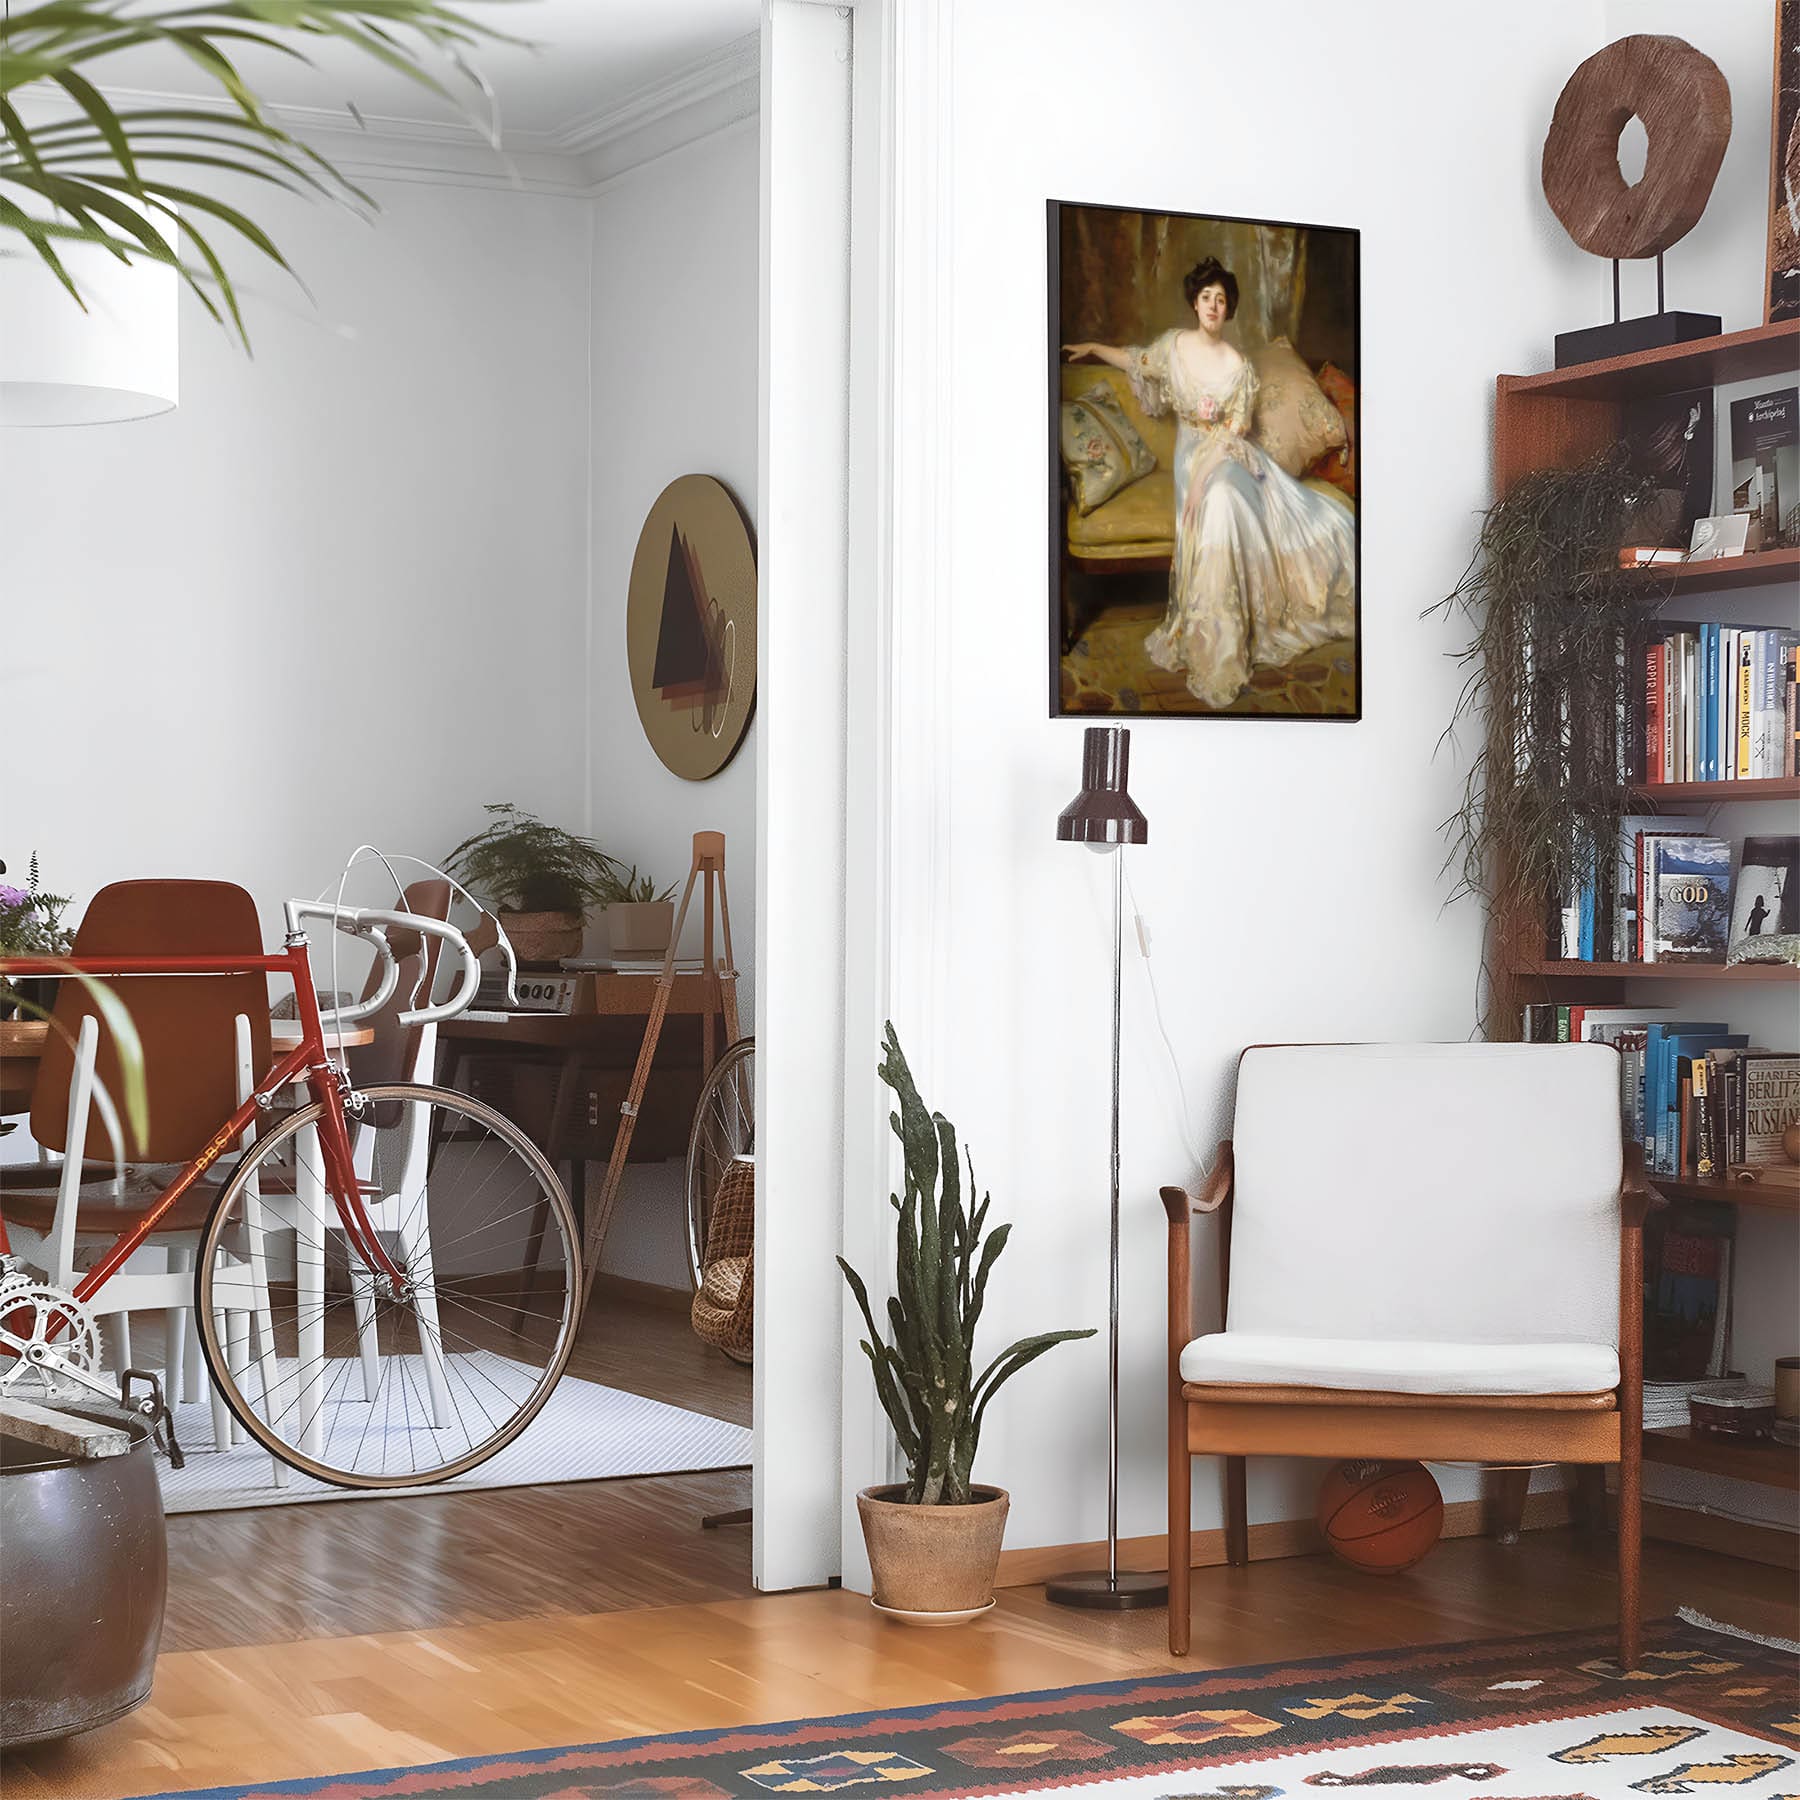 Eclectic living room with a road bike, bookshelf and house plants that features framed artwork of a Woman in a White Dress above a chair and lamp